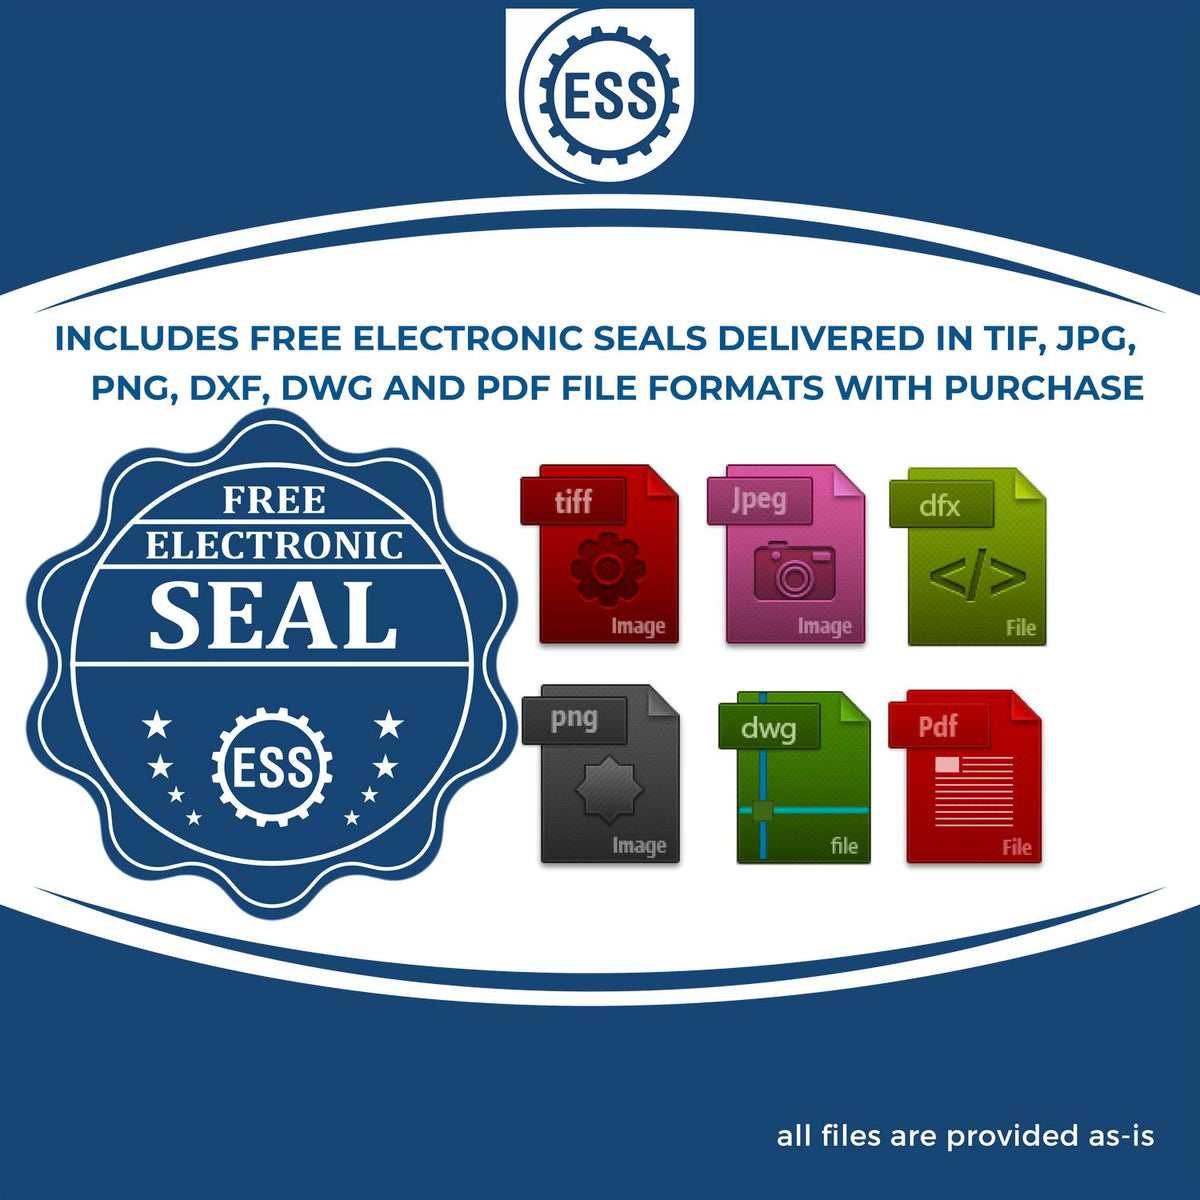 An infographic for the free electronic seal for the Heavy Duty Cast Iron Delaware Geologist Seal Embosser illustrating the different file type icons such as DXF, DWG, TIF, JPG and PNG.